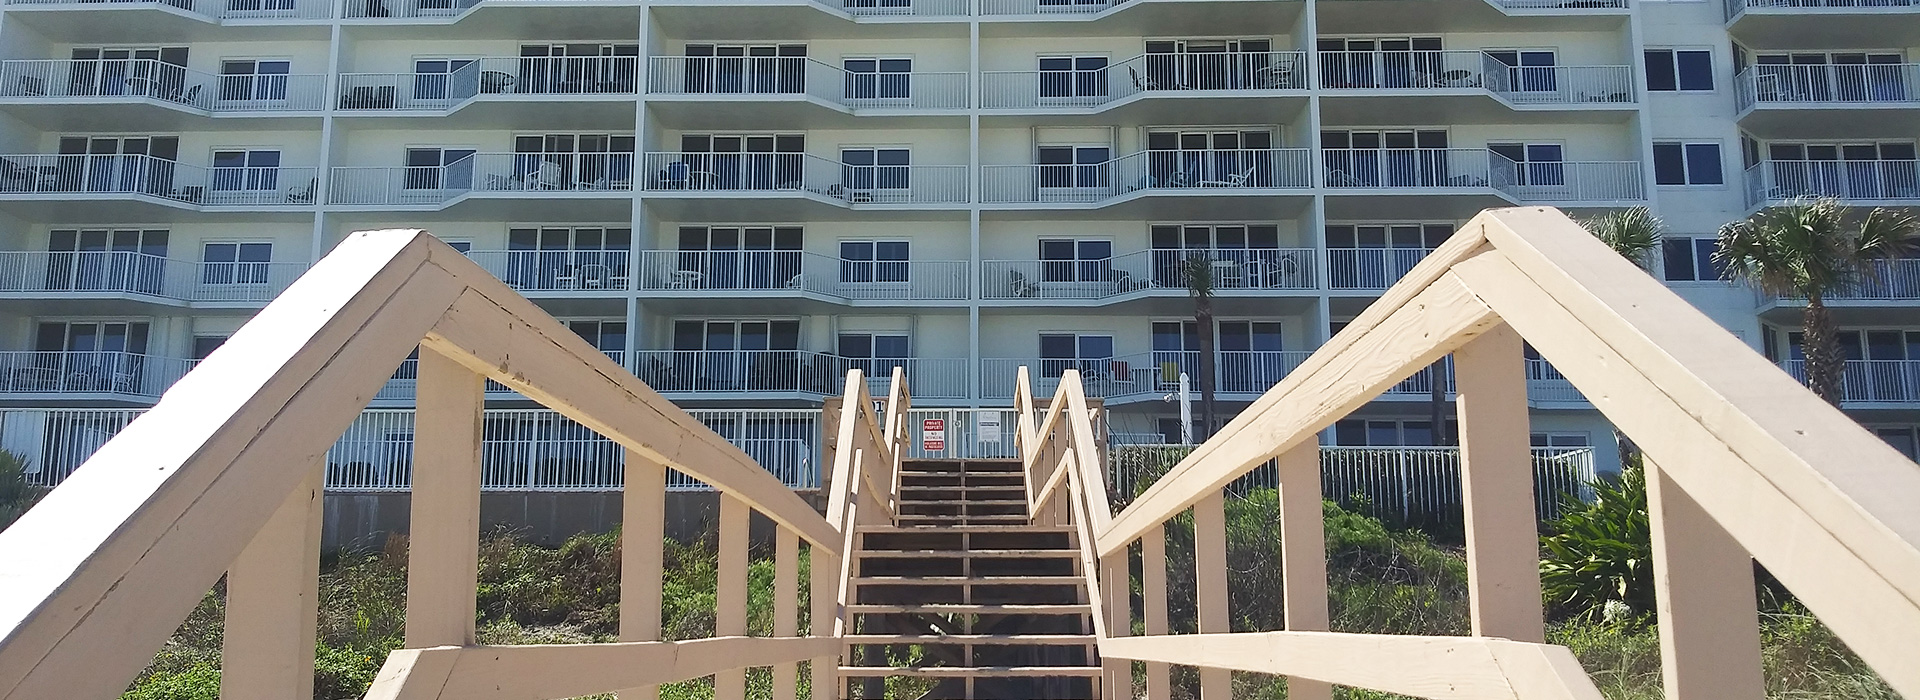 Access the pool from the beach boardwalk